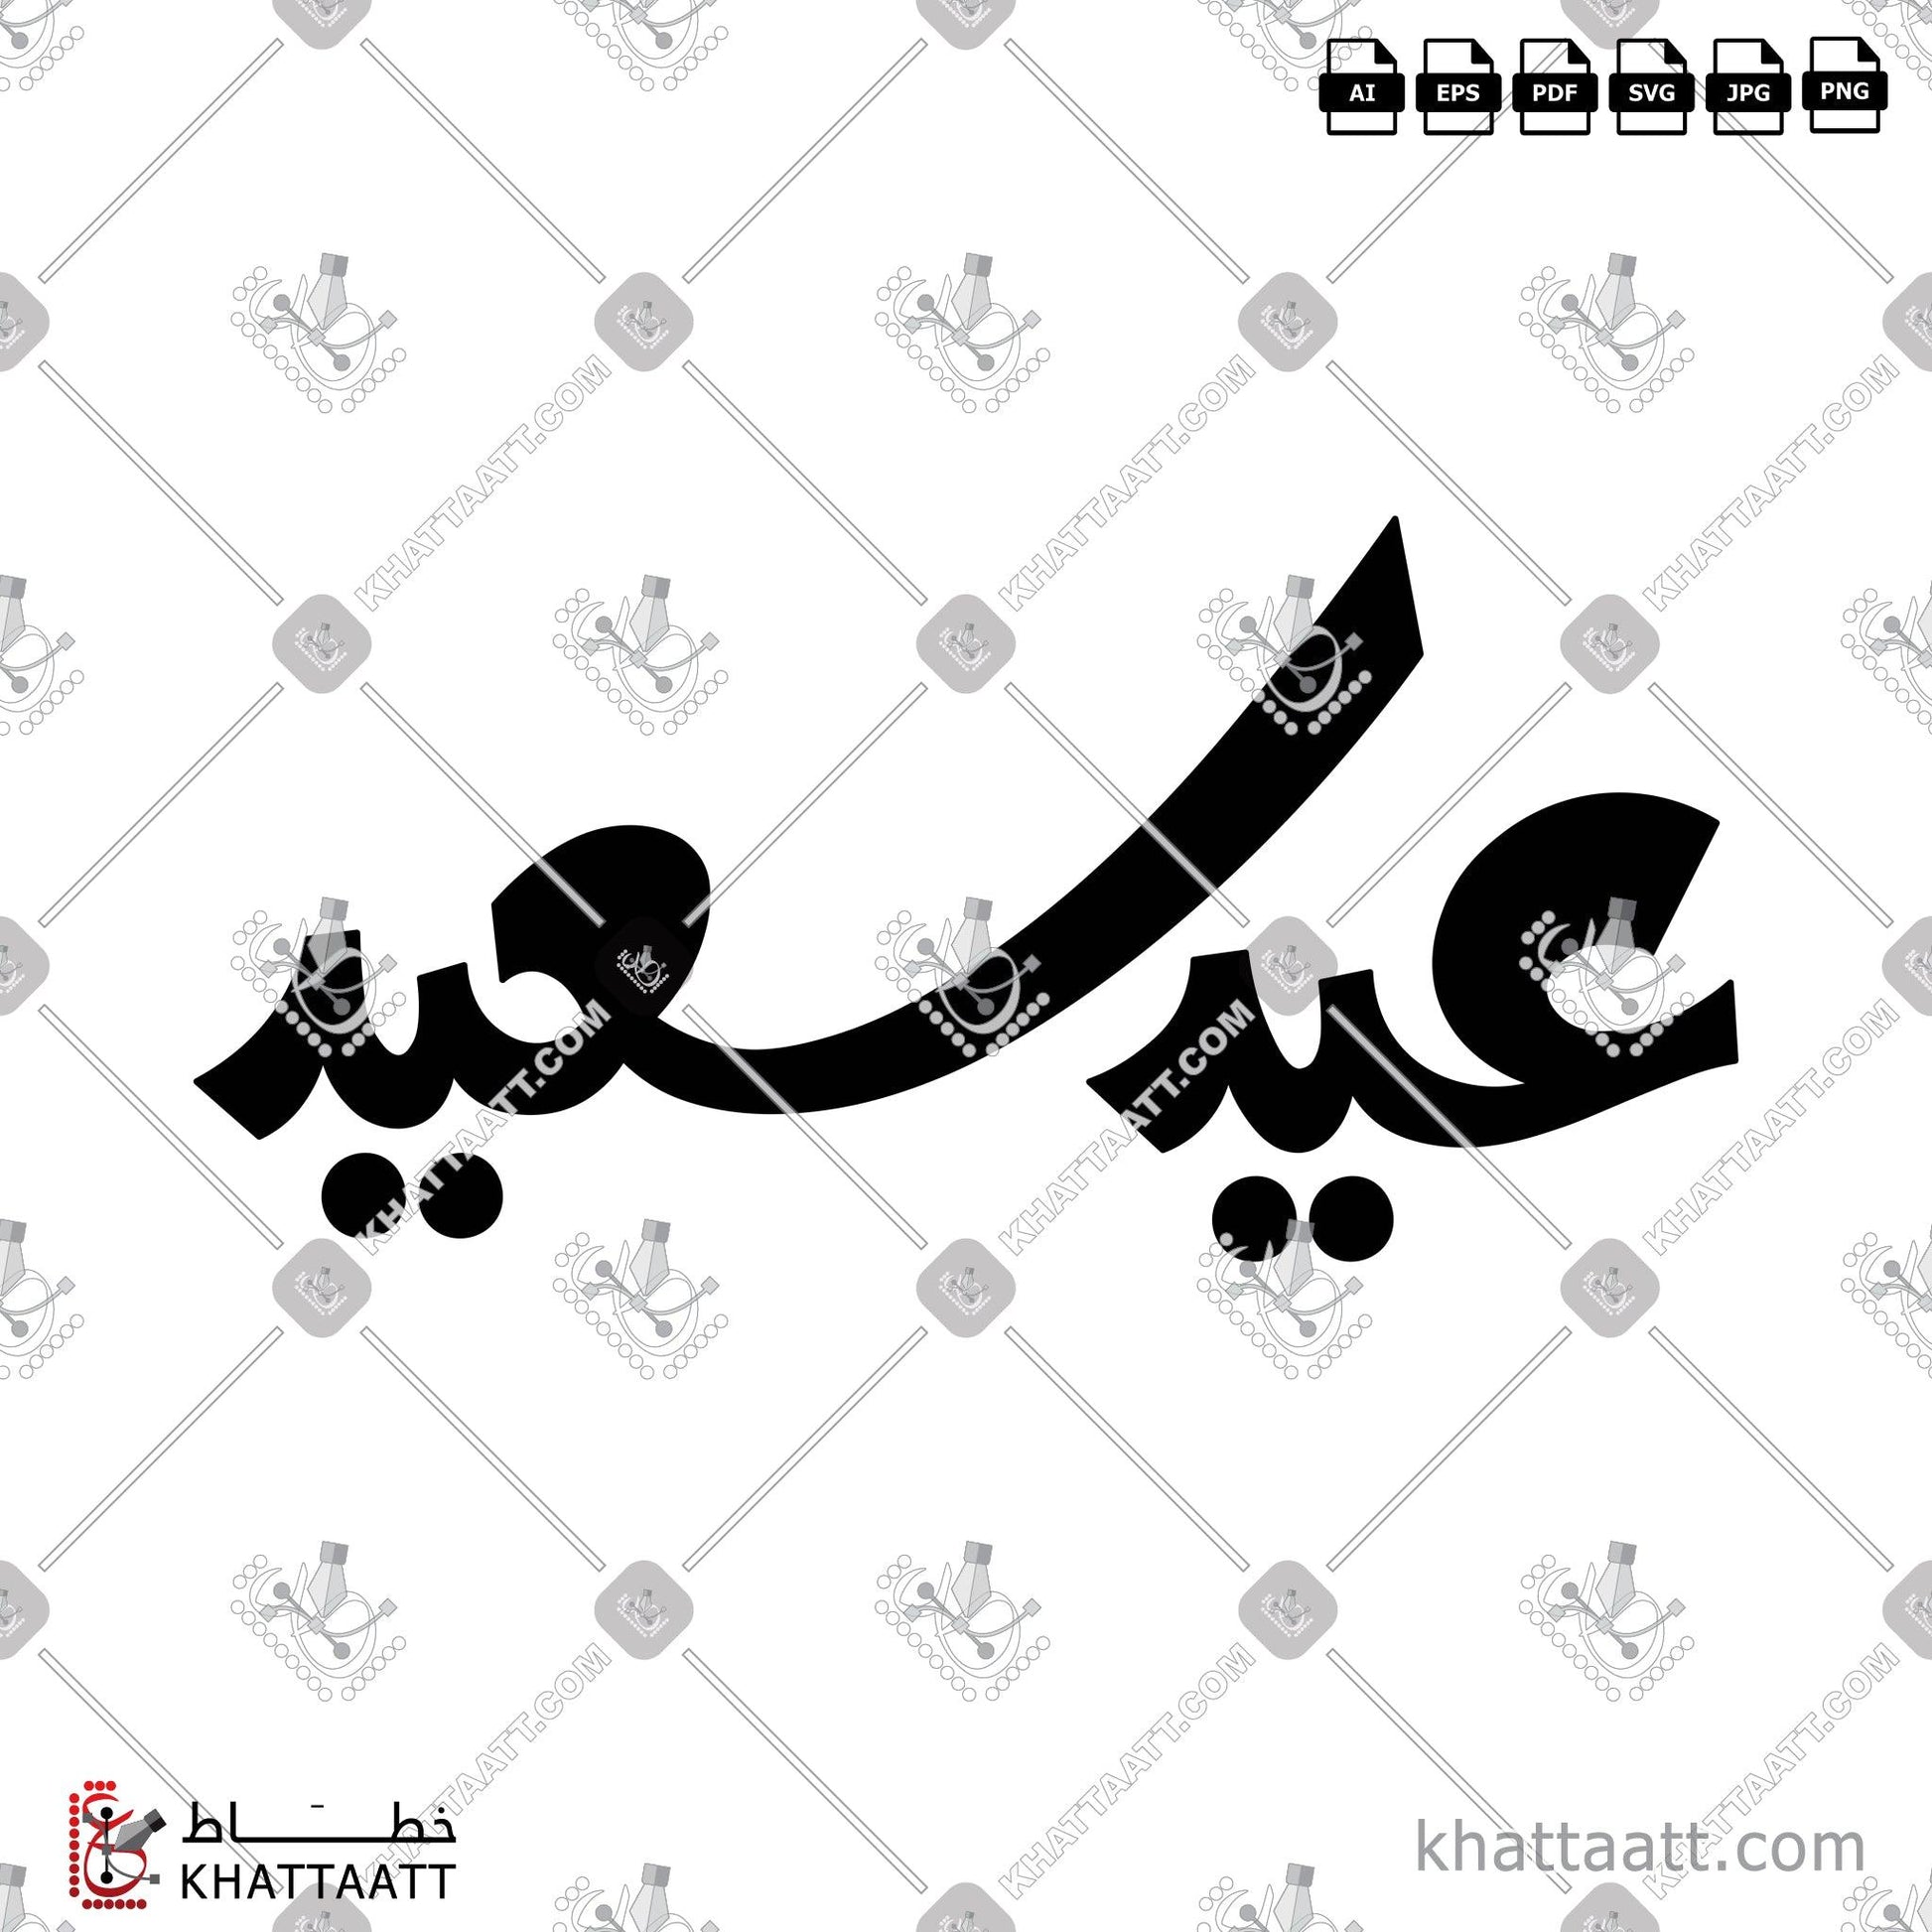 Download Arabic Calligraphy of عيد سعيد in FreeStyle - الخط الحر in vector and .png